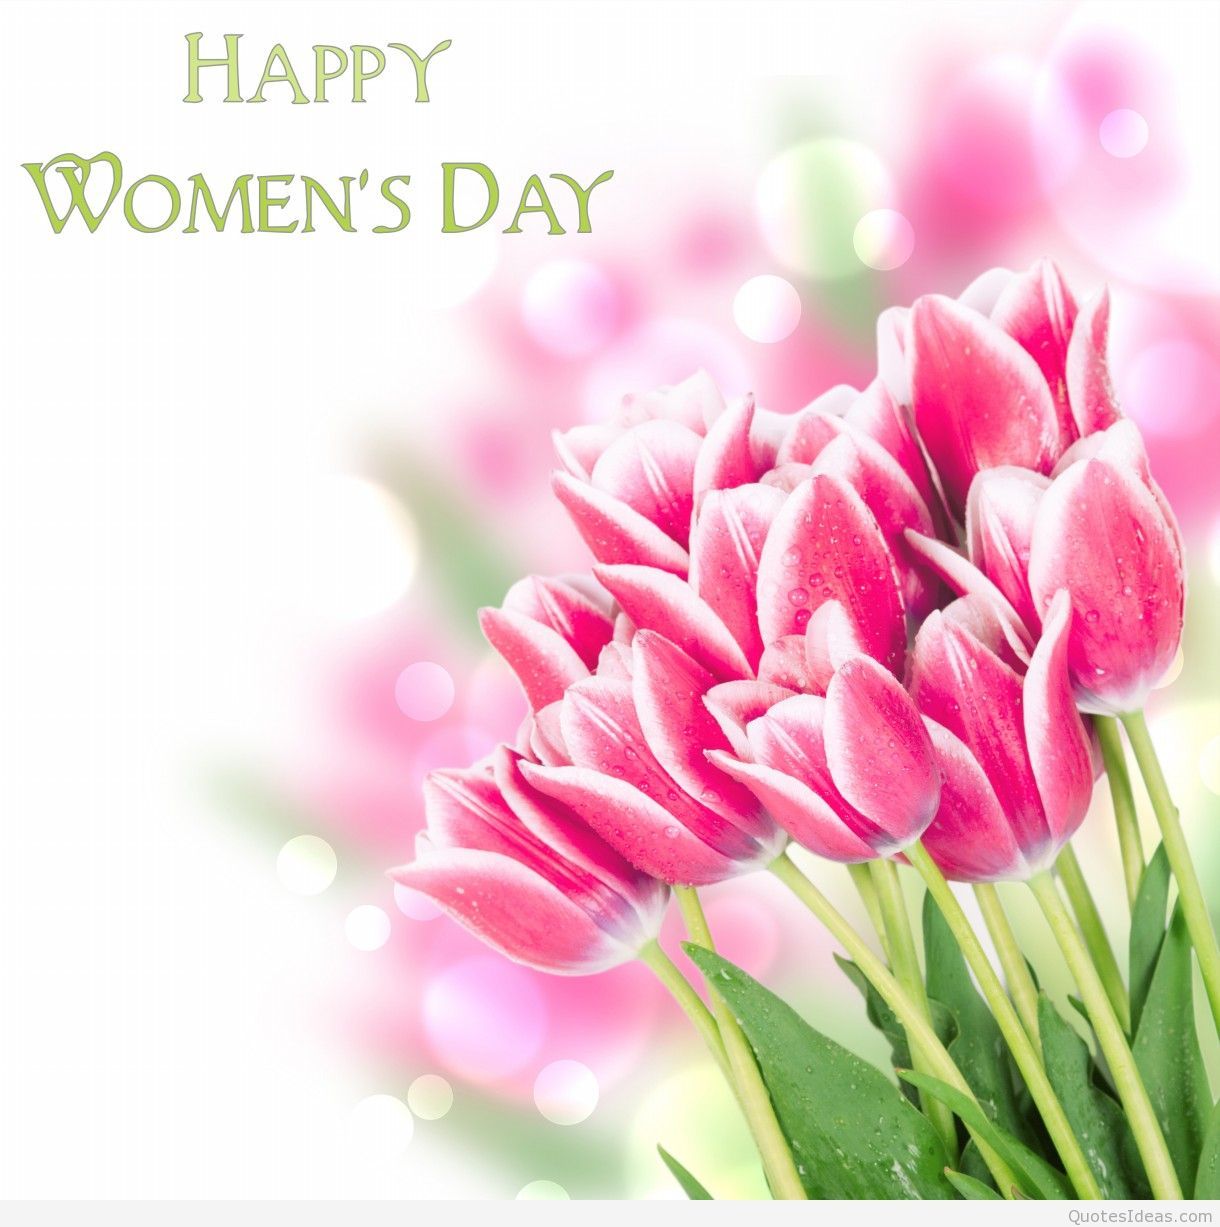 Happy women's day 8 march quotes image and wallpaper